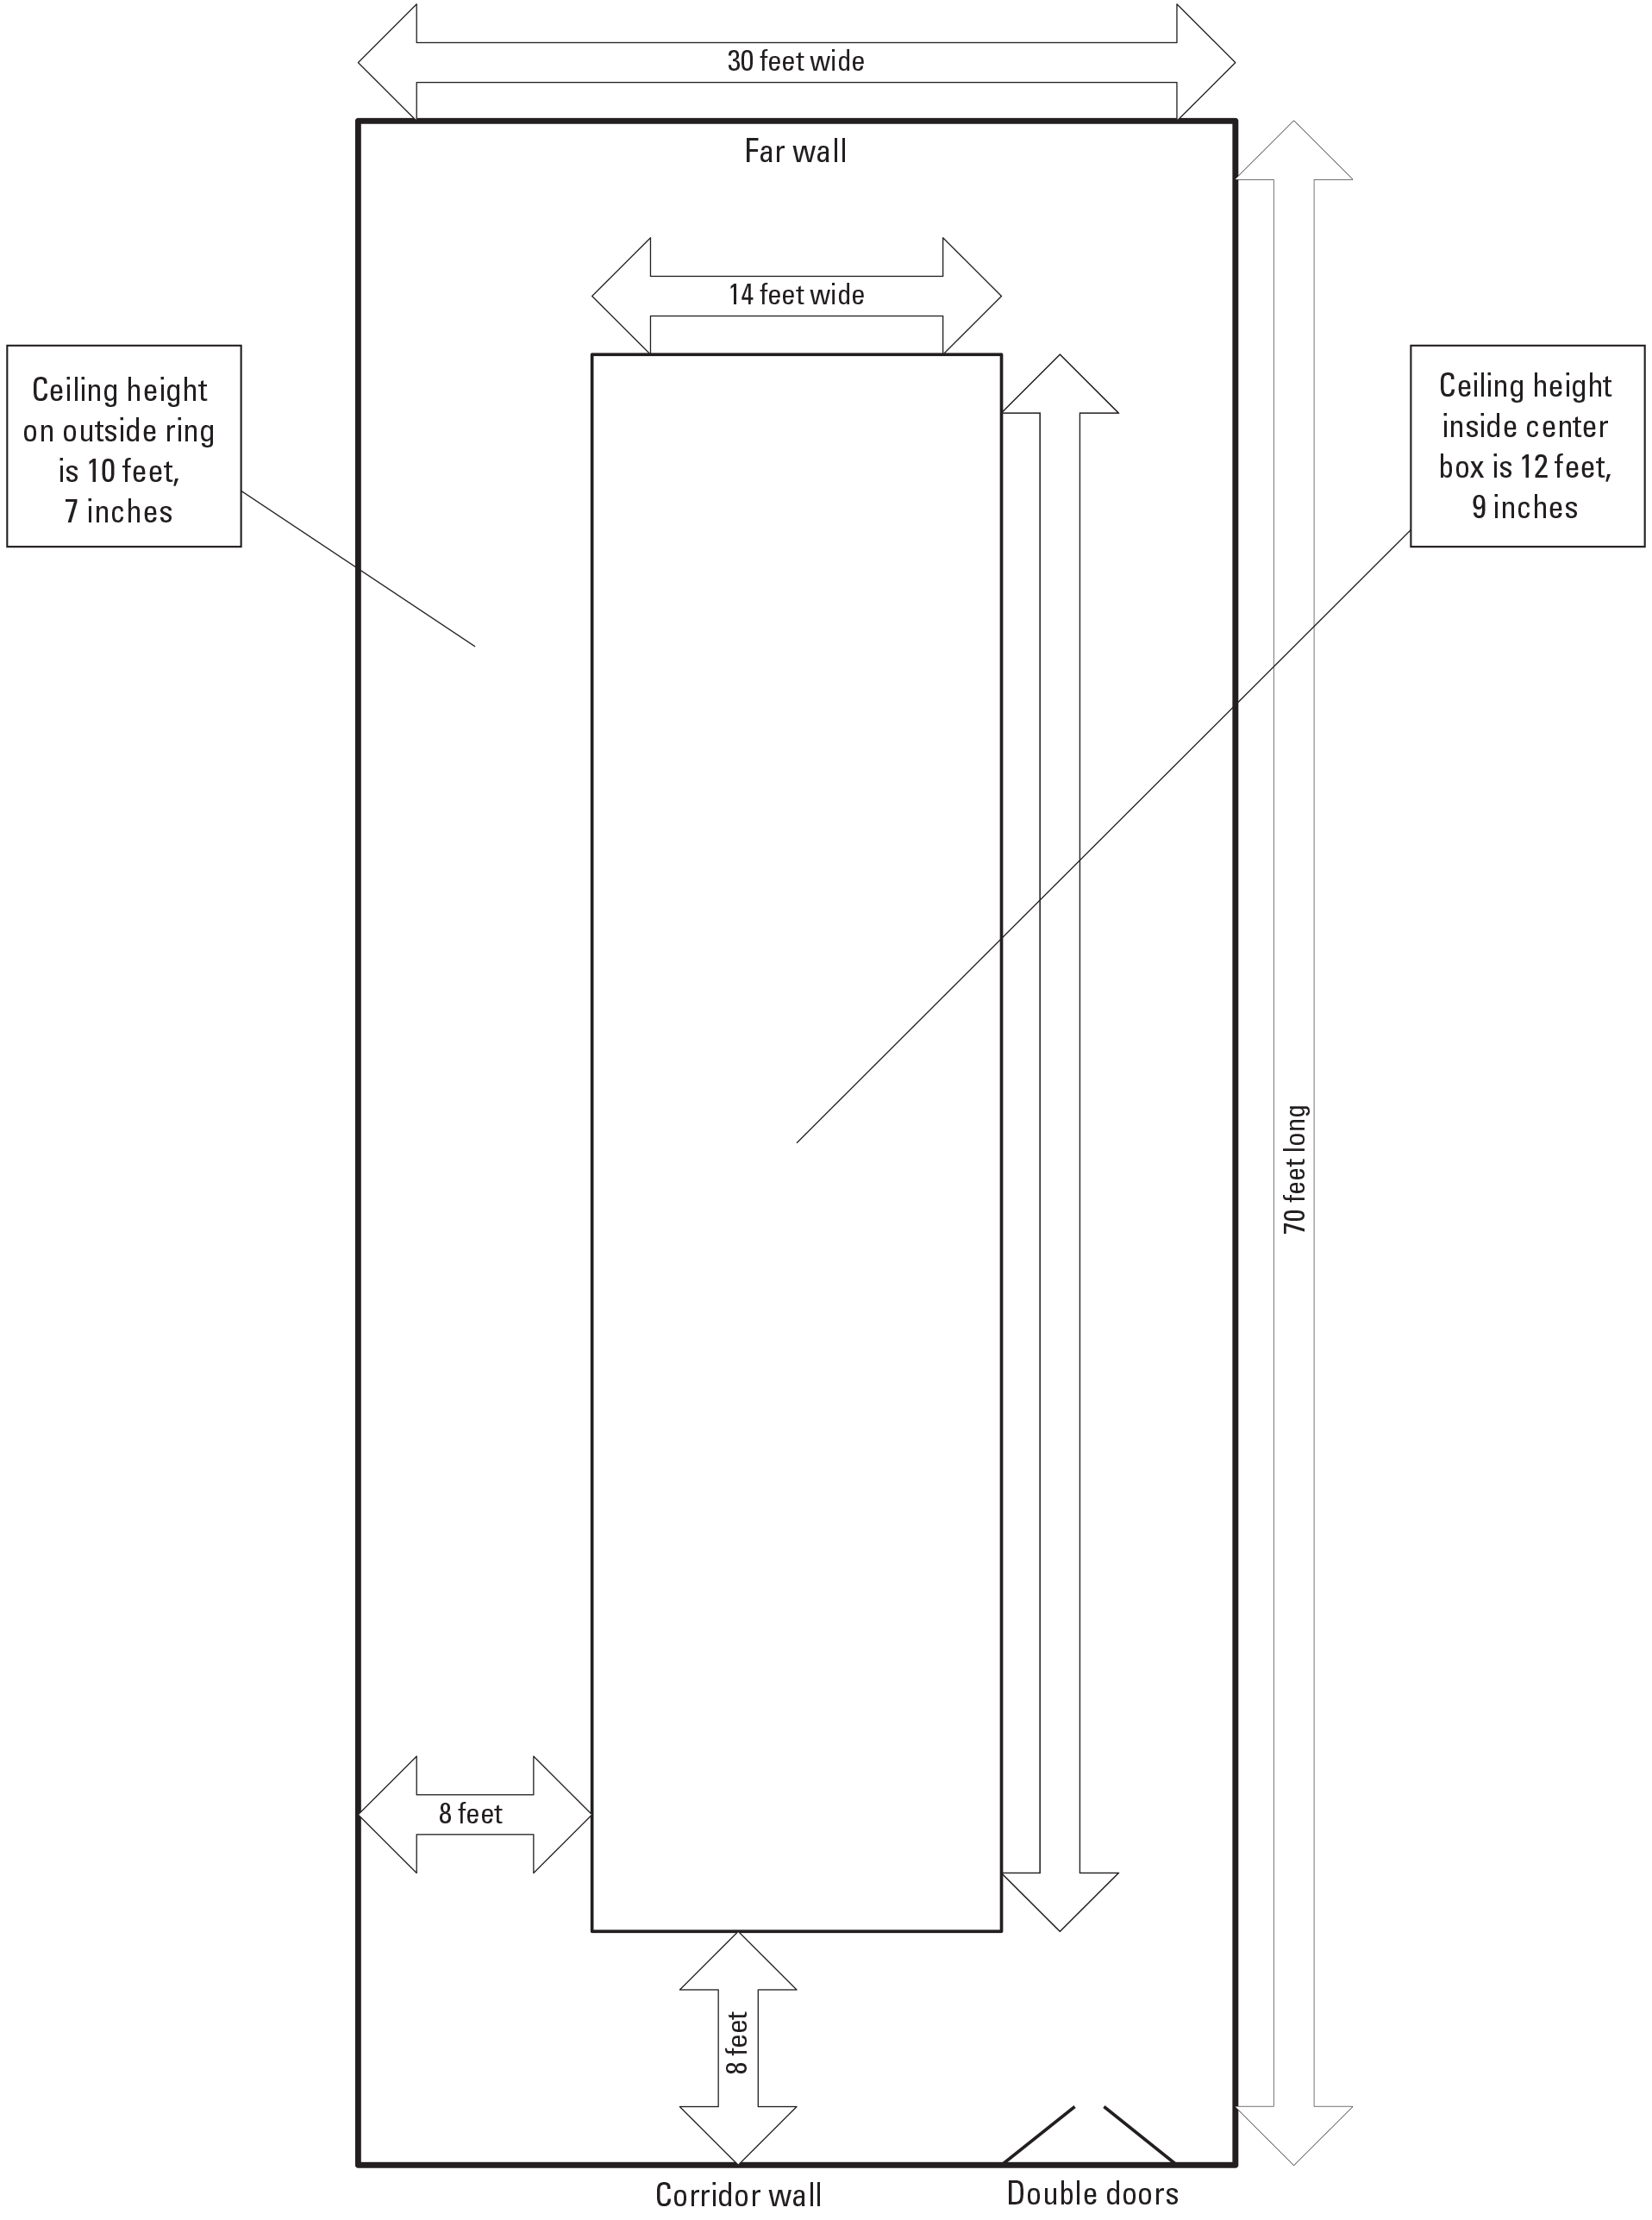 Schematic of a room with dimensions for rooms, corridor, and ceiling height.